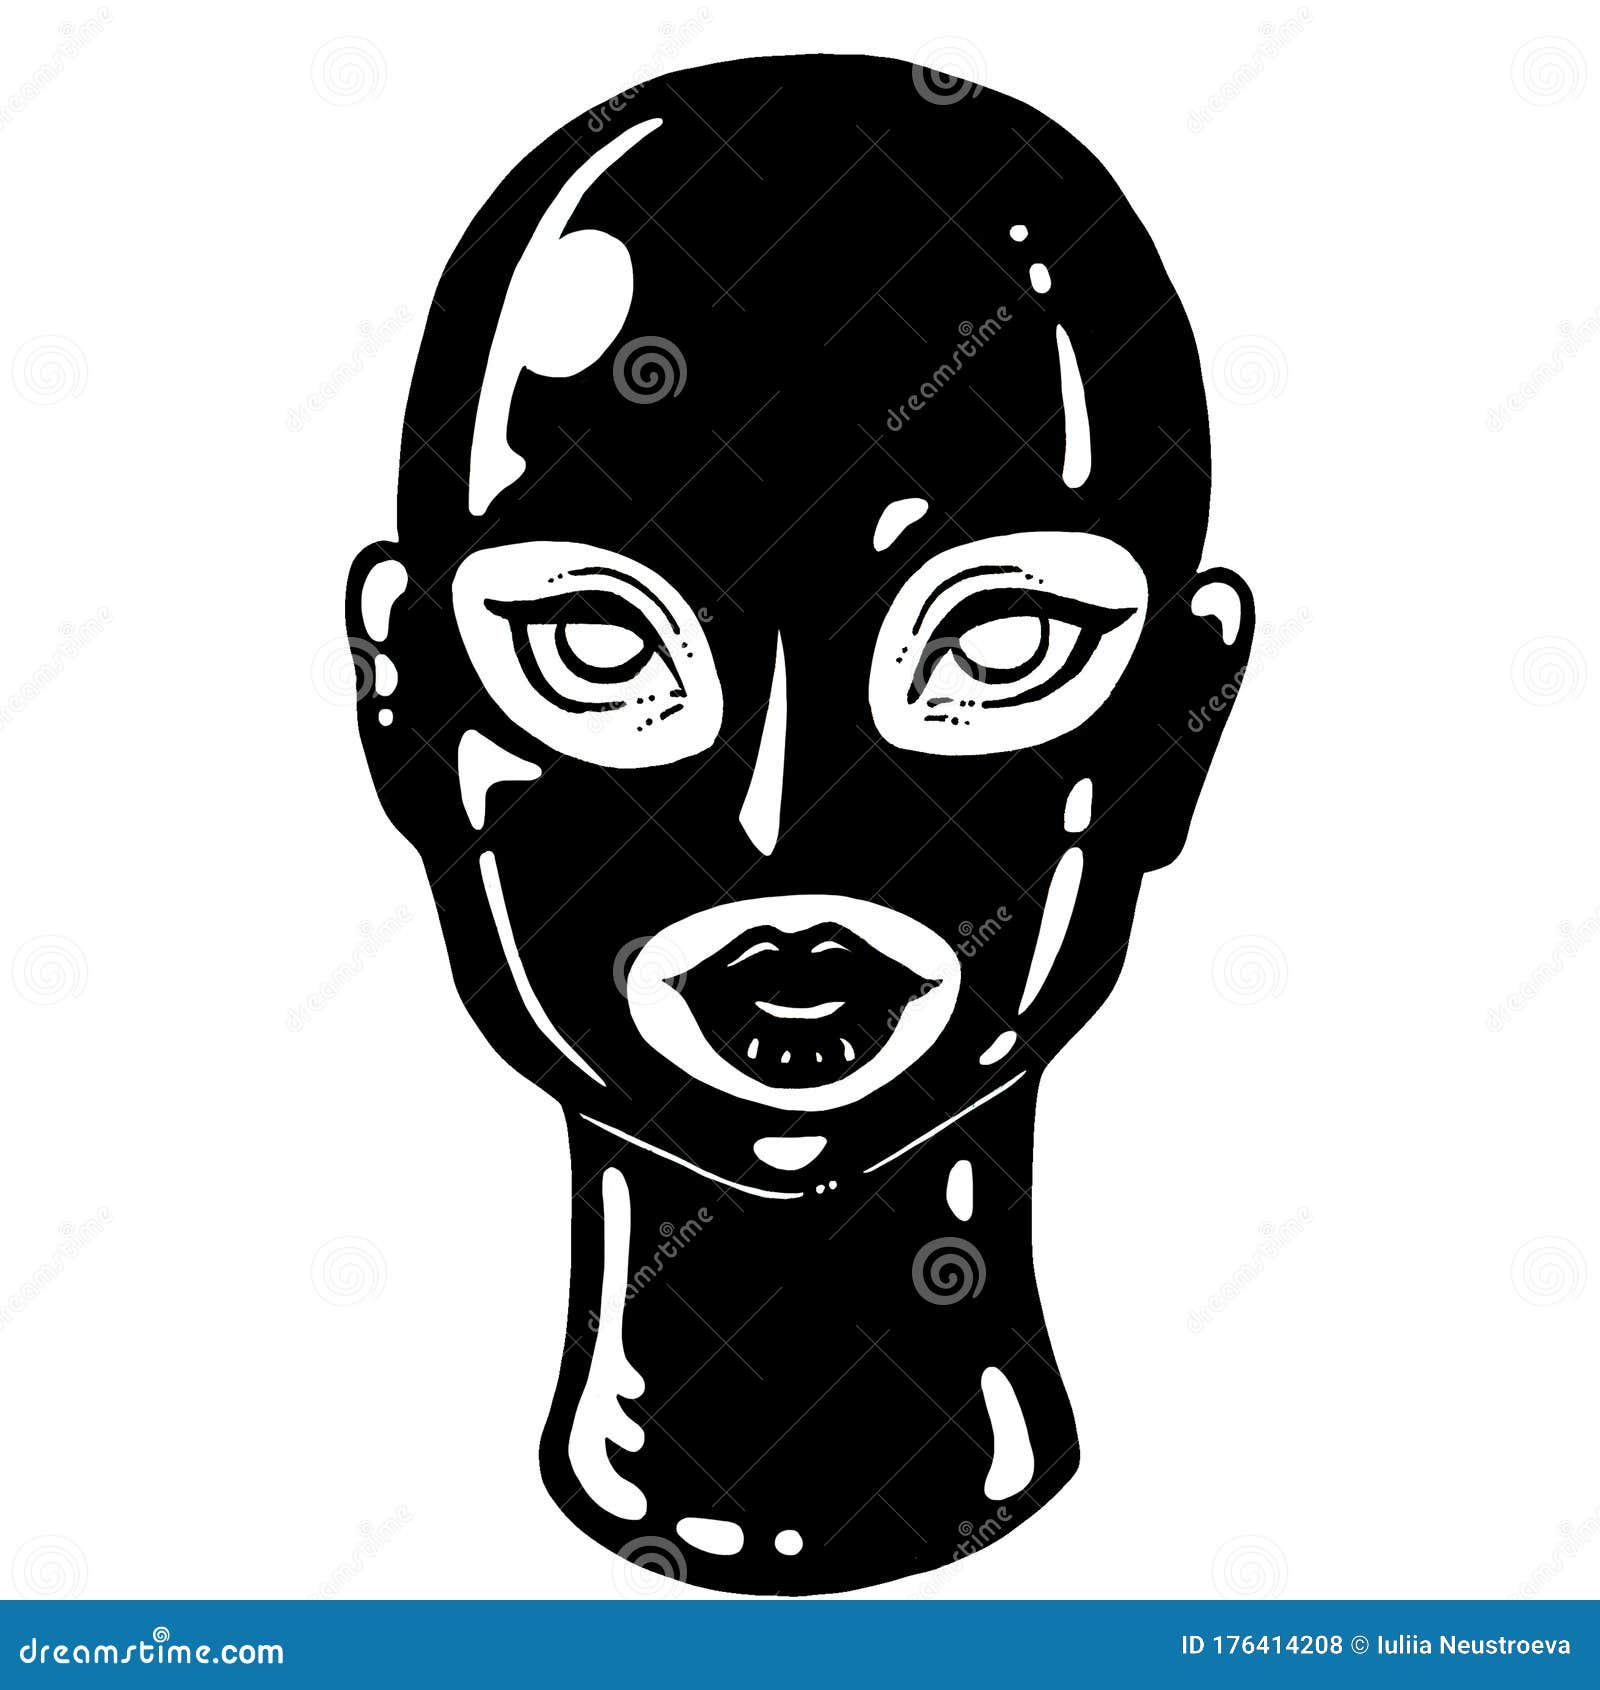 Latex Sex Bondage Art Drawing - Black and White BDSM Vintage Ink Woman in Latex Mask Illustration Stock  Illustration - Illustration of provocative, lady: 176414208